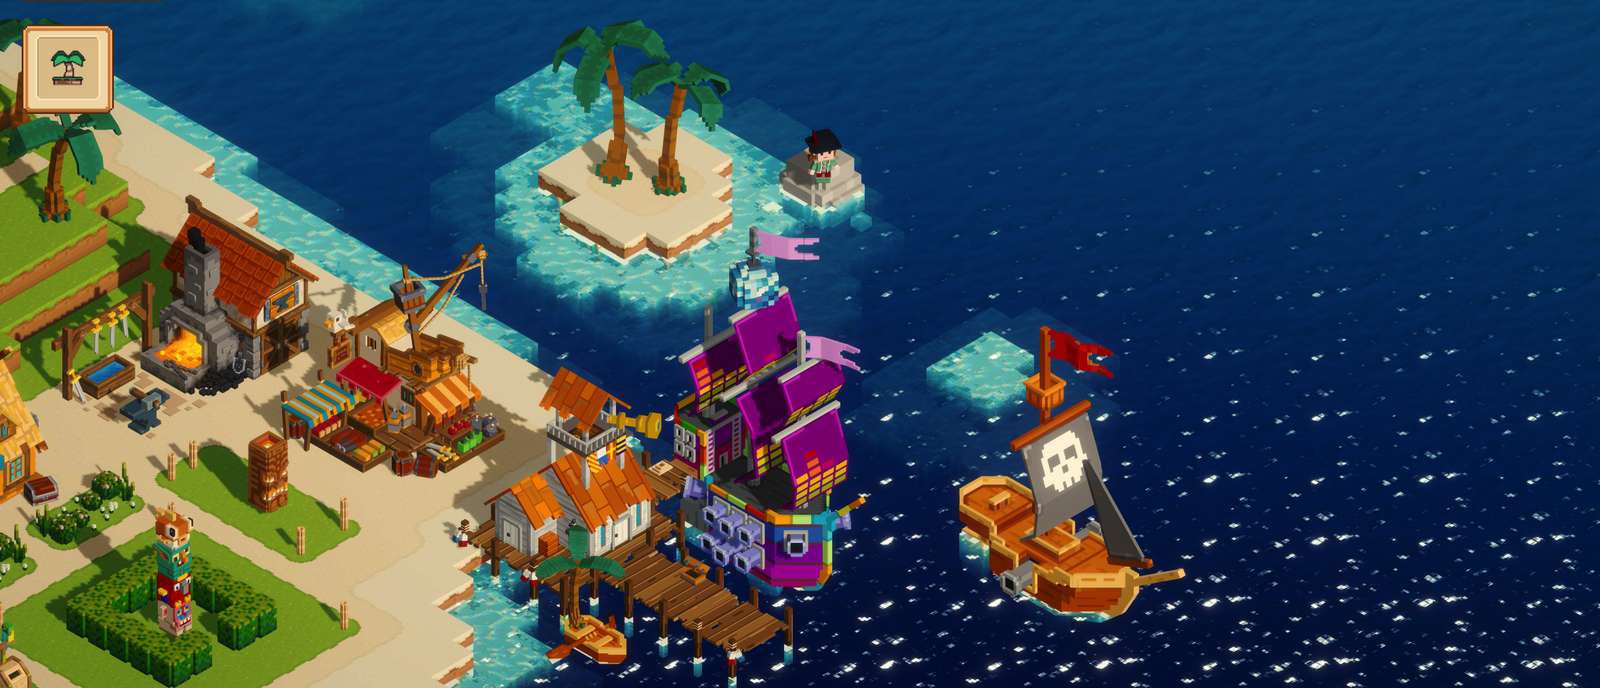 Final event - Pirate Nation online puzzle